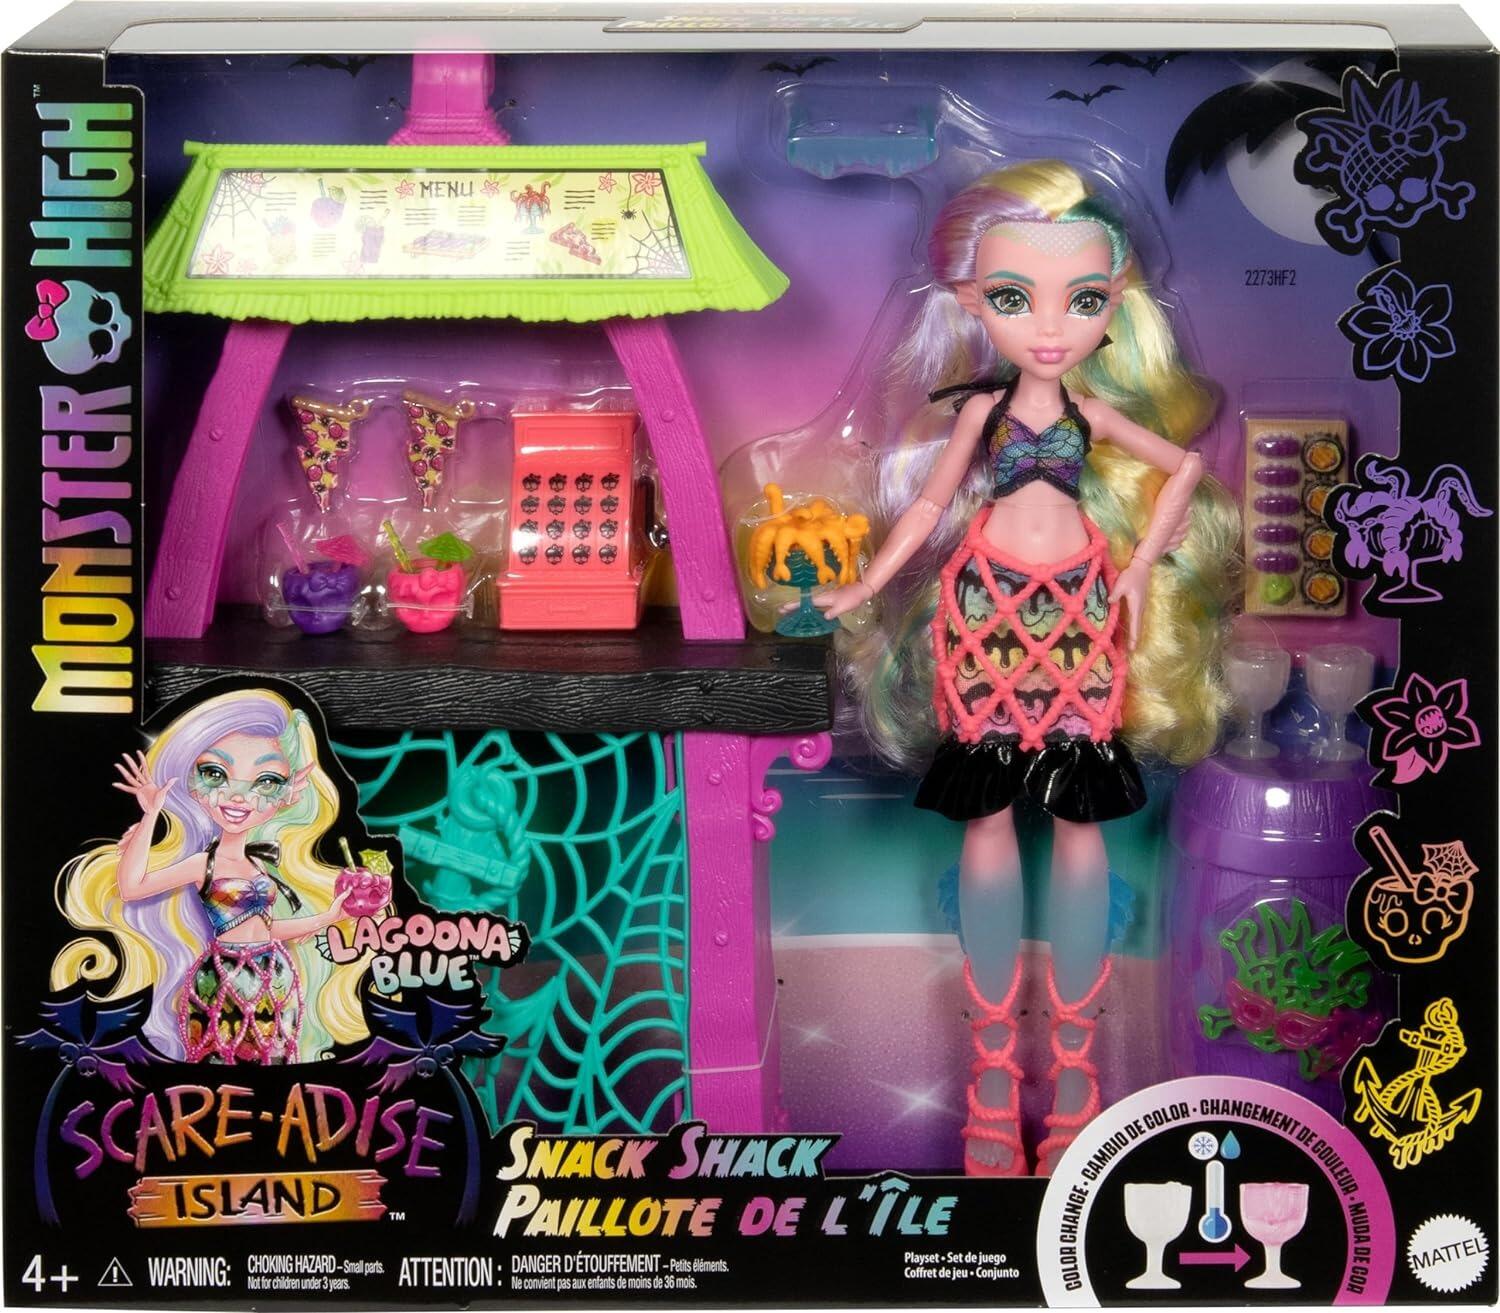 Monster High Doll and Playset, Lagoona Blue Scare-adise Island Snack Shack with Food Accessories and Color Change Drinks